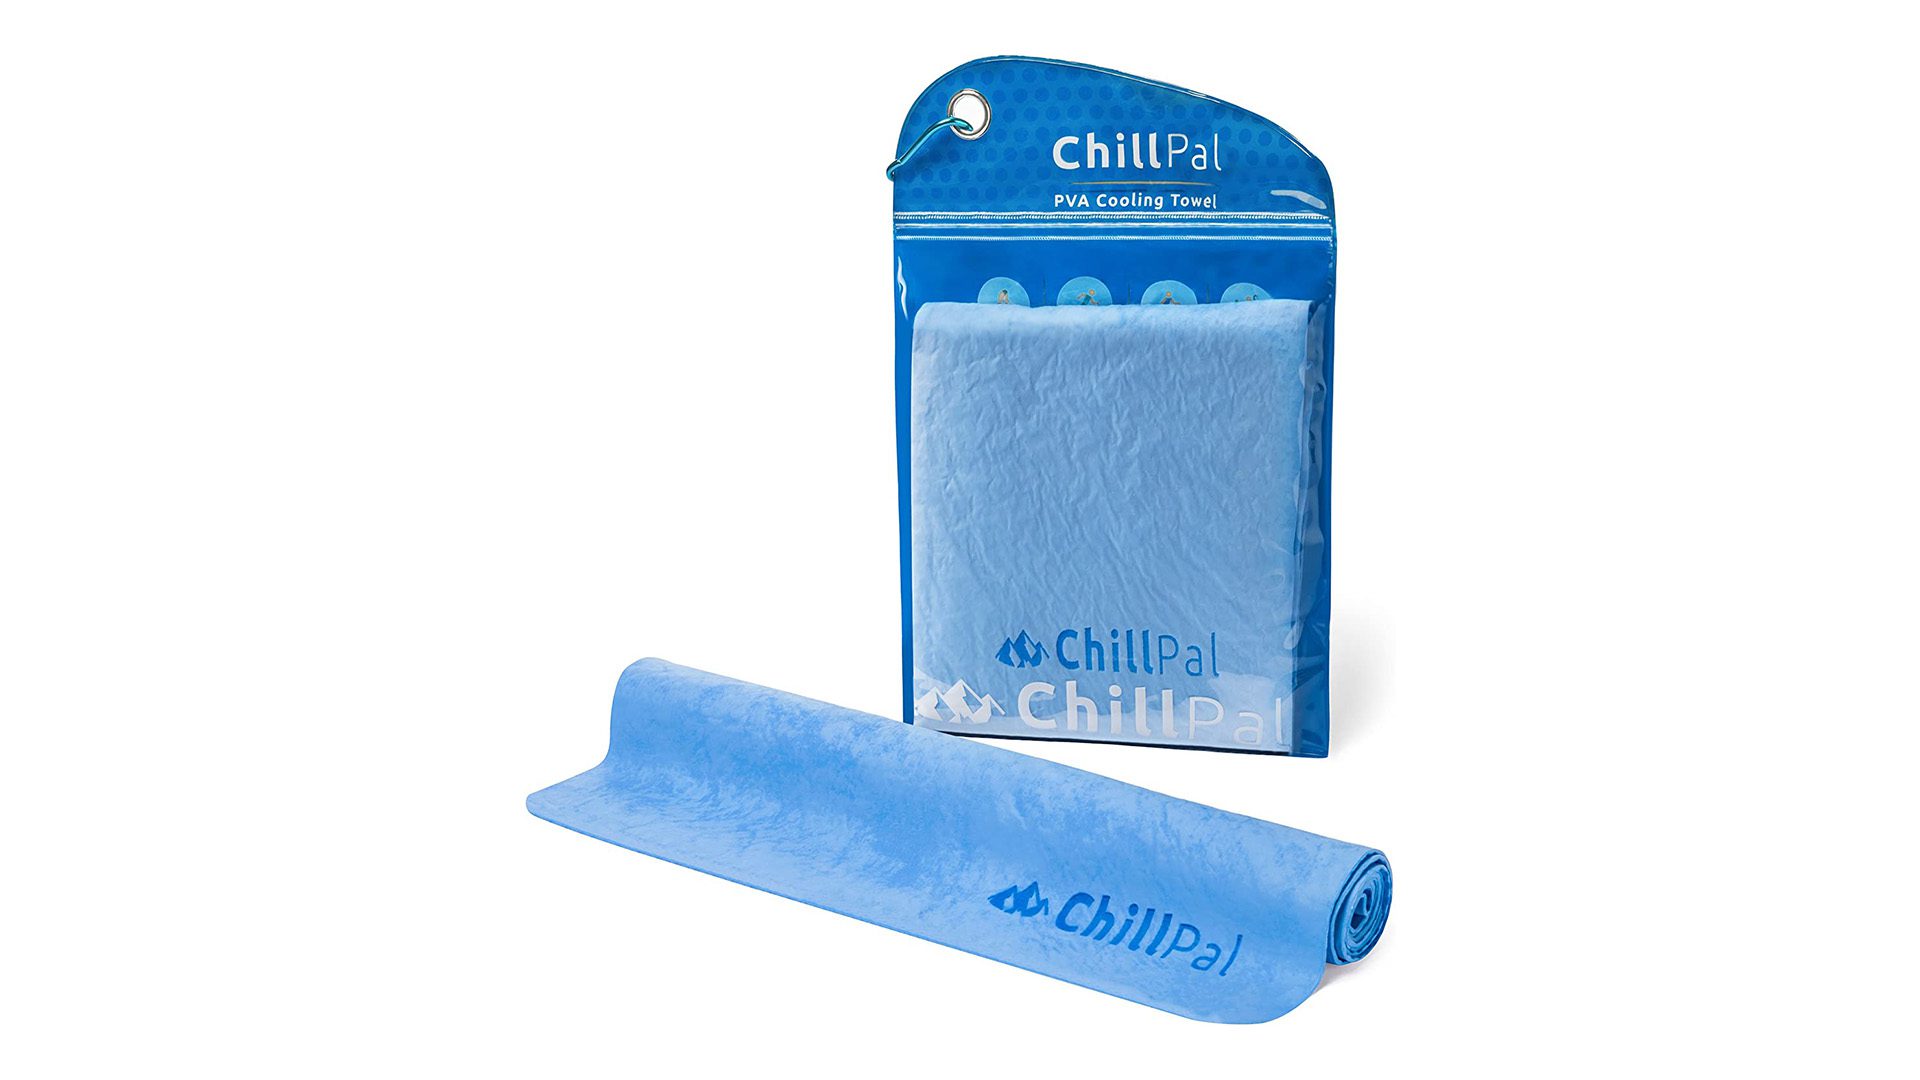 Chill Pal PVA Cooling Towel summer products